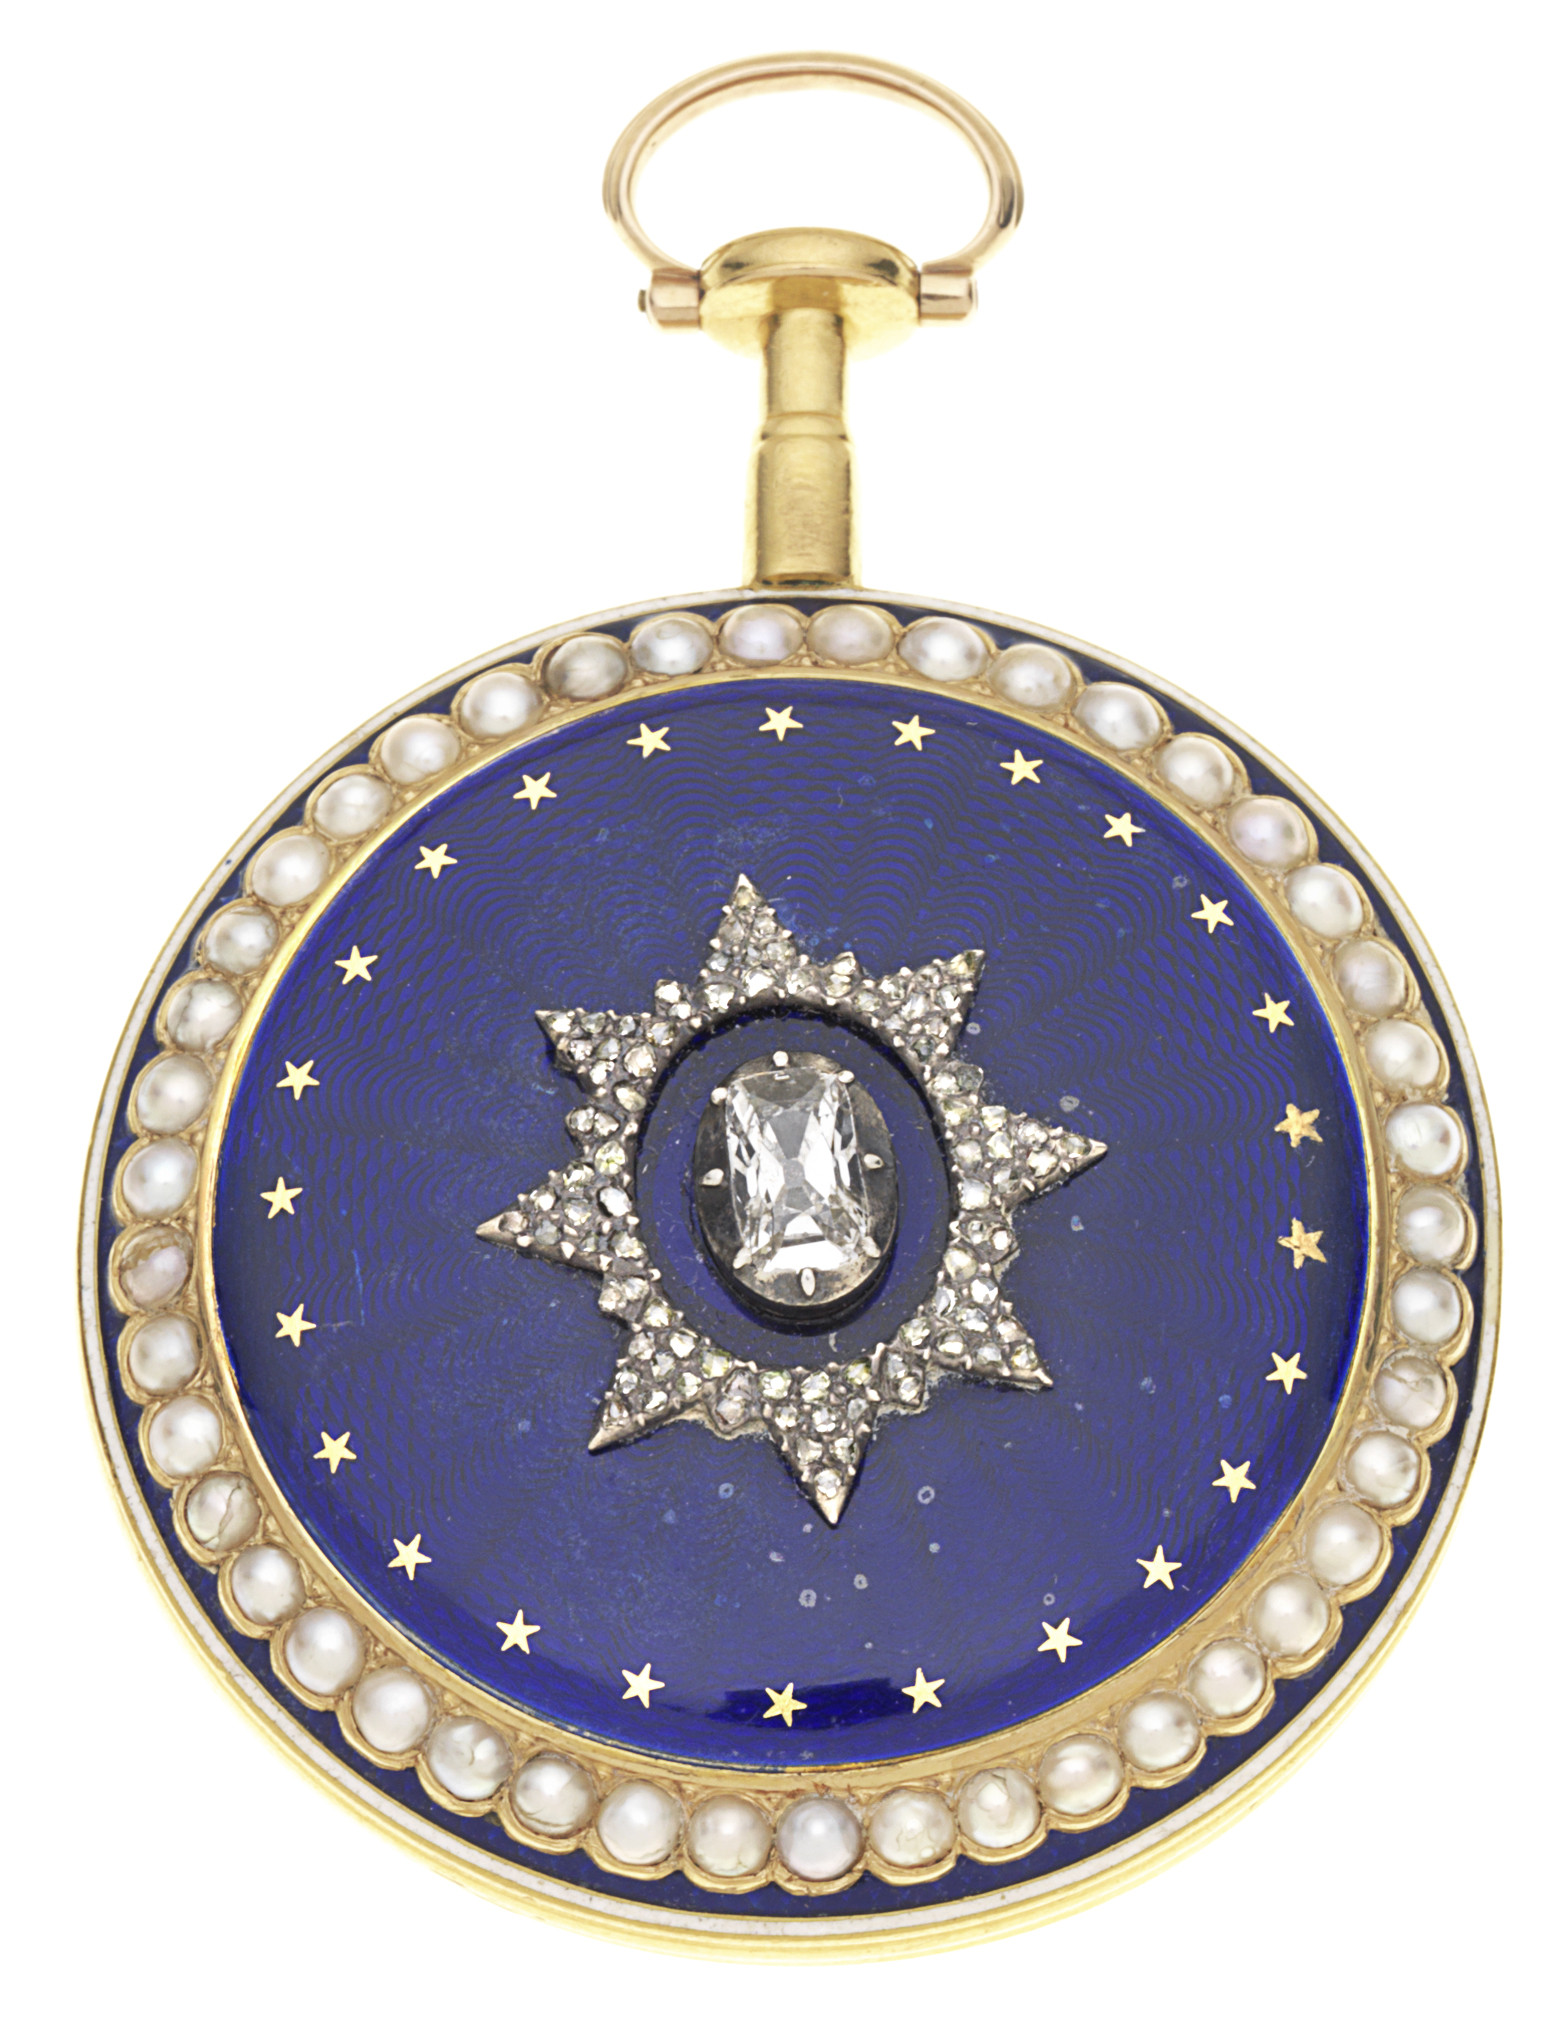 Johnson, grays inn passage gold, enamel and seed pearl set key wind open face pocket watch with £1,500-2,000 estimate.